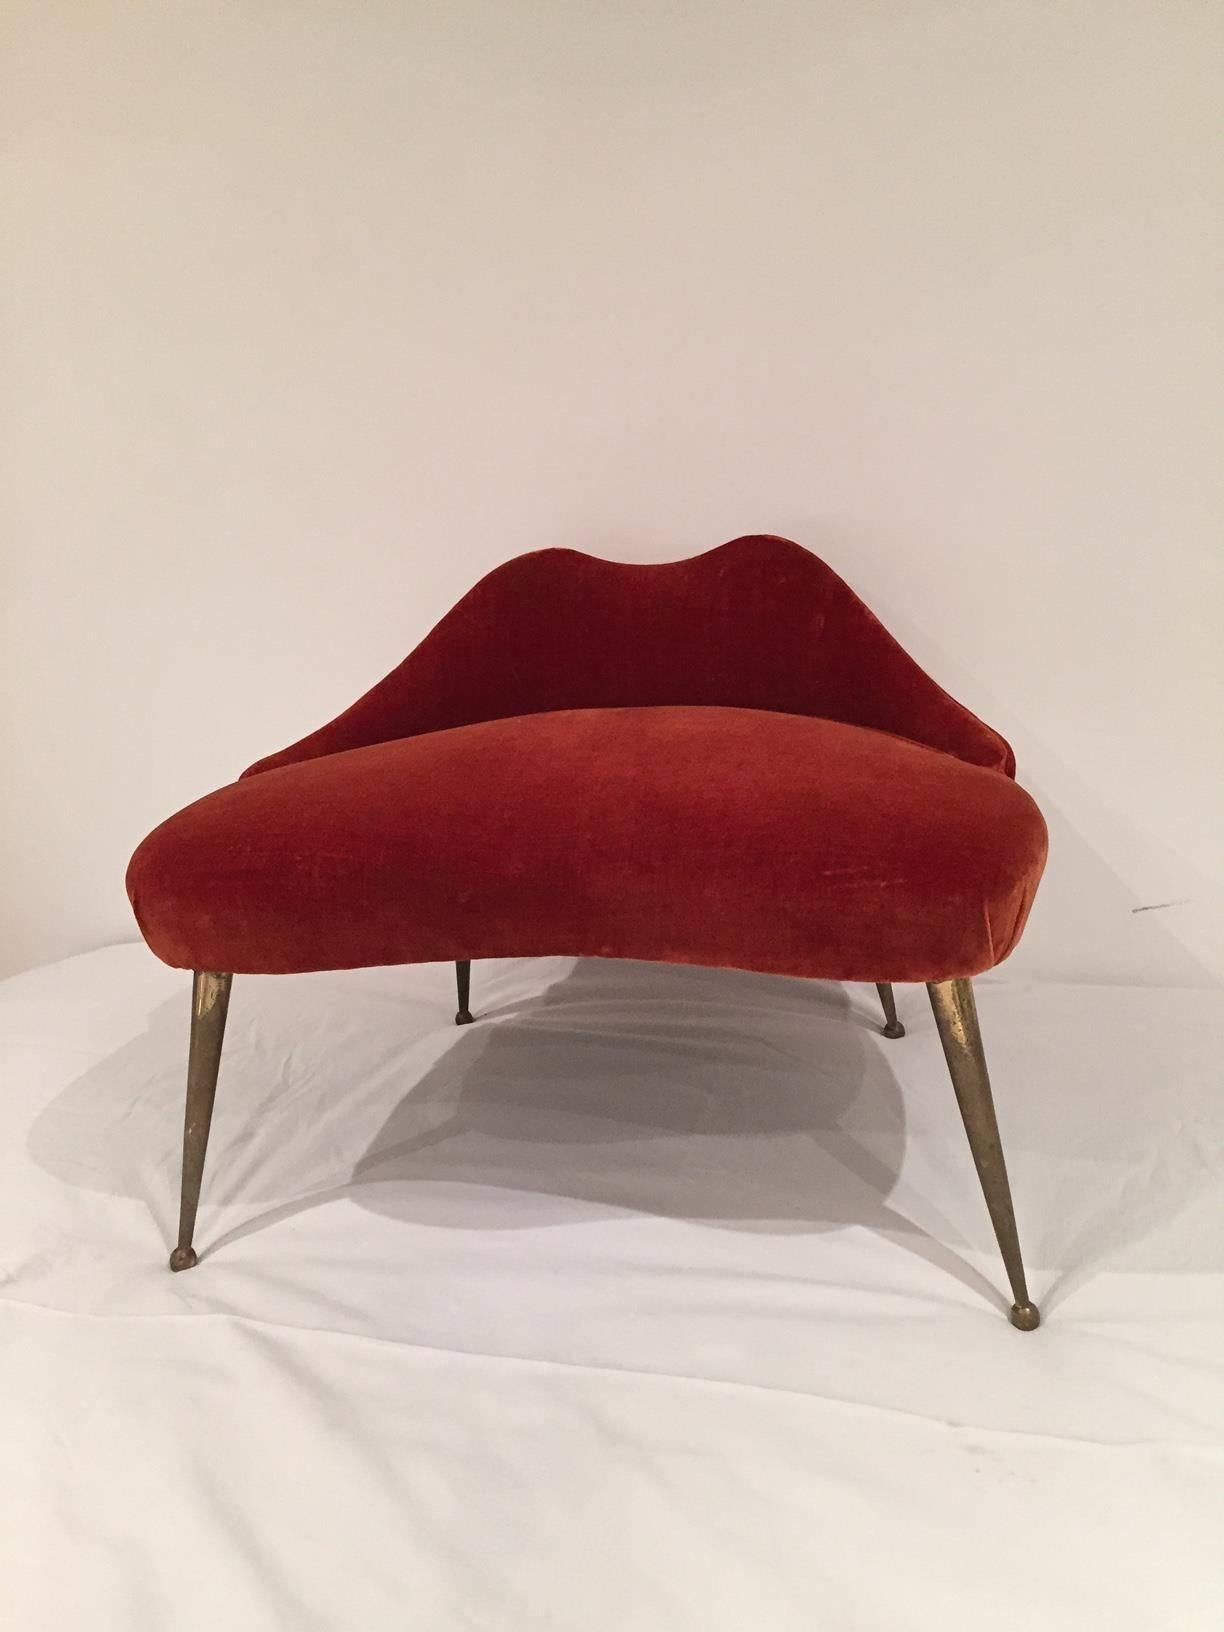 This beautiful and unusual stool in the shape of the lips been found in Italy, circa 1950.
Reupholstered in red velvet, and have brass polished feet.